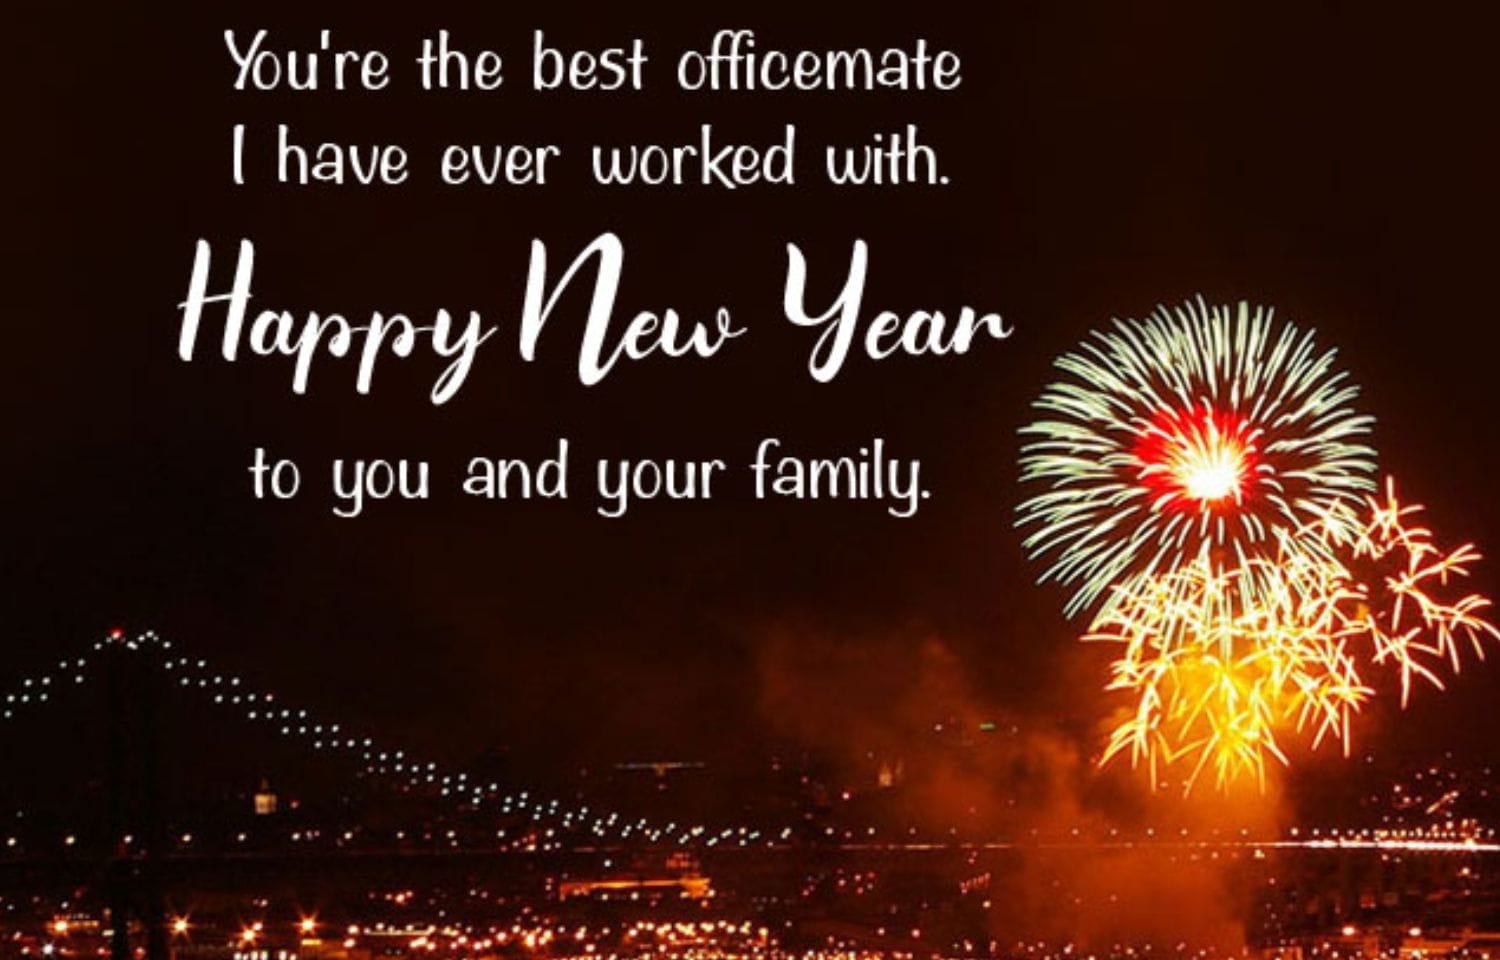 Happy New Year Wishes For Coworkers